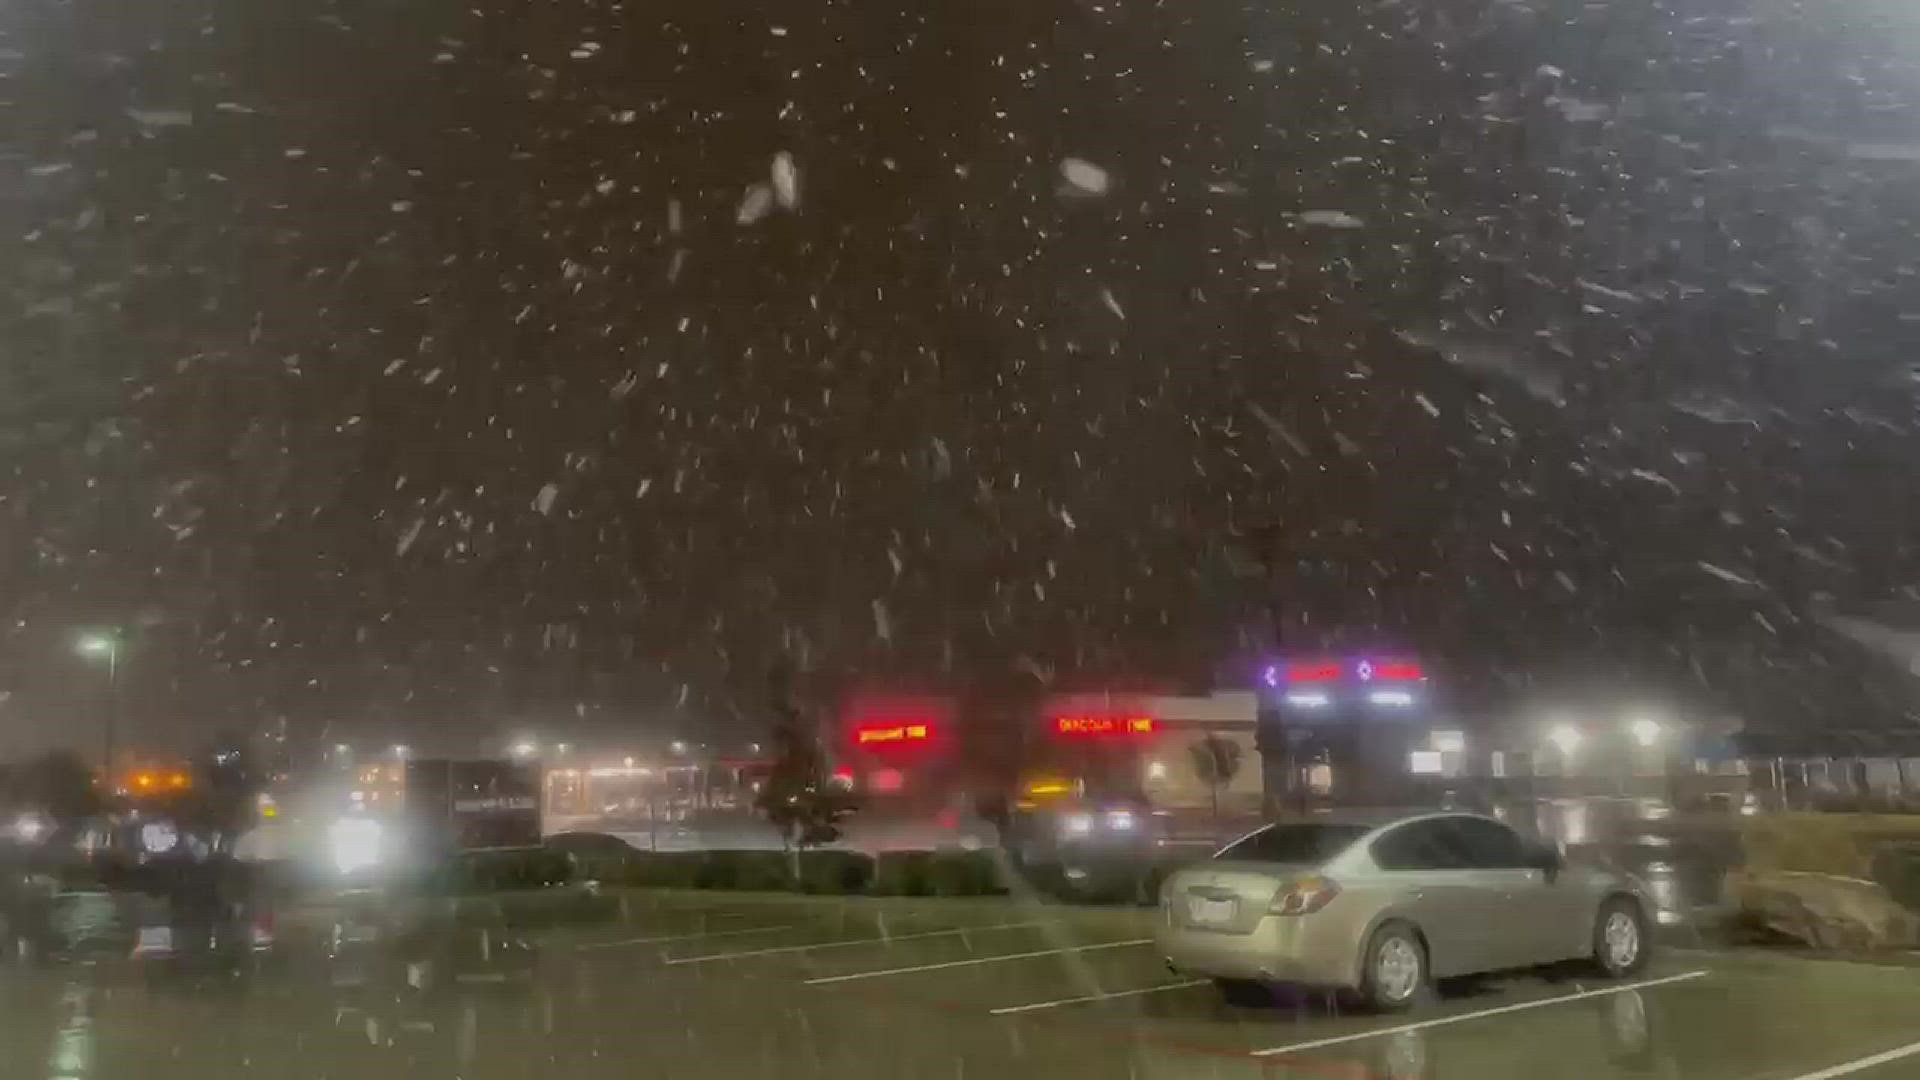 CBS19's Evening Anchor Brennon Gurley captured snowflakes falling from the sky in Murphy, Texas.